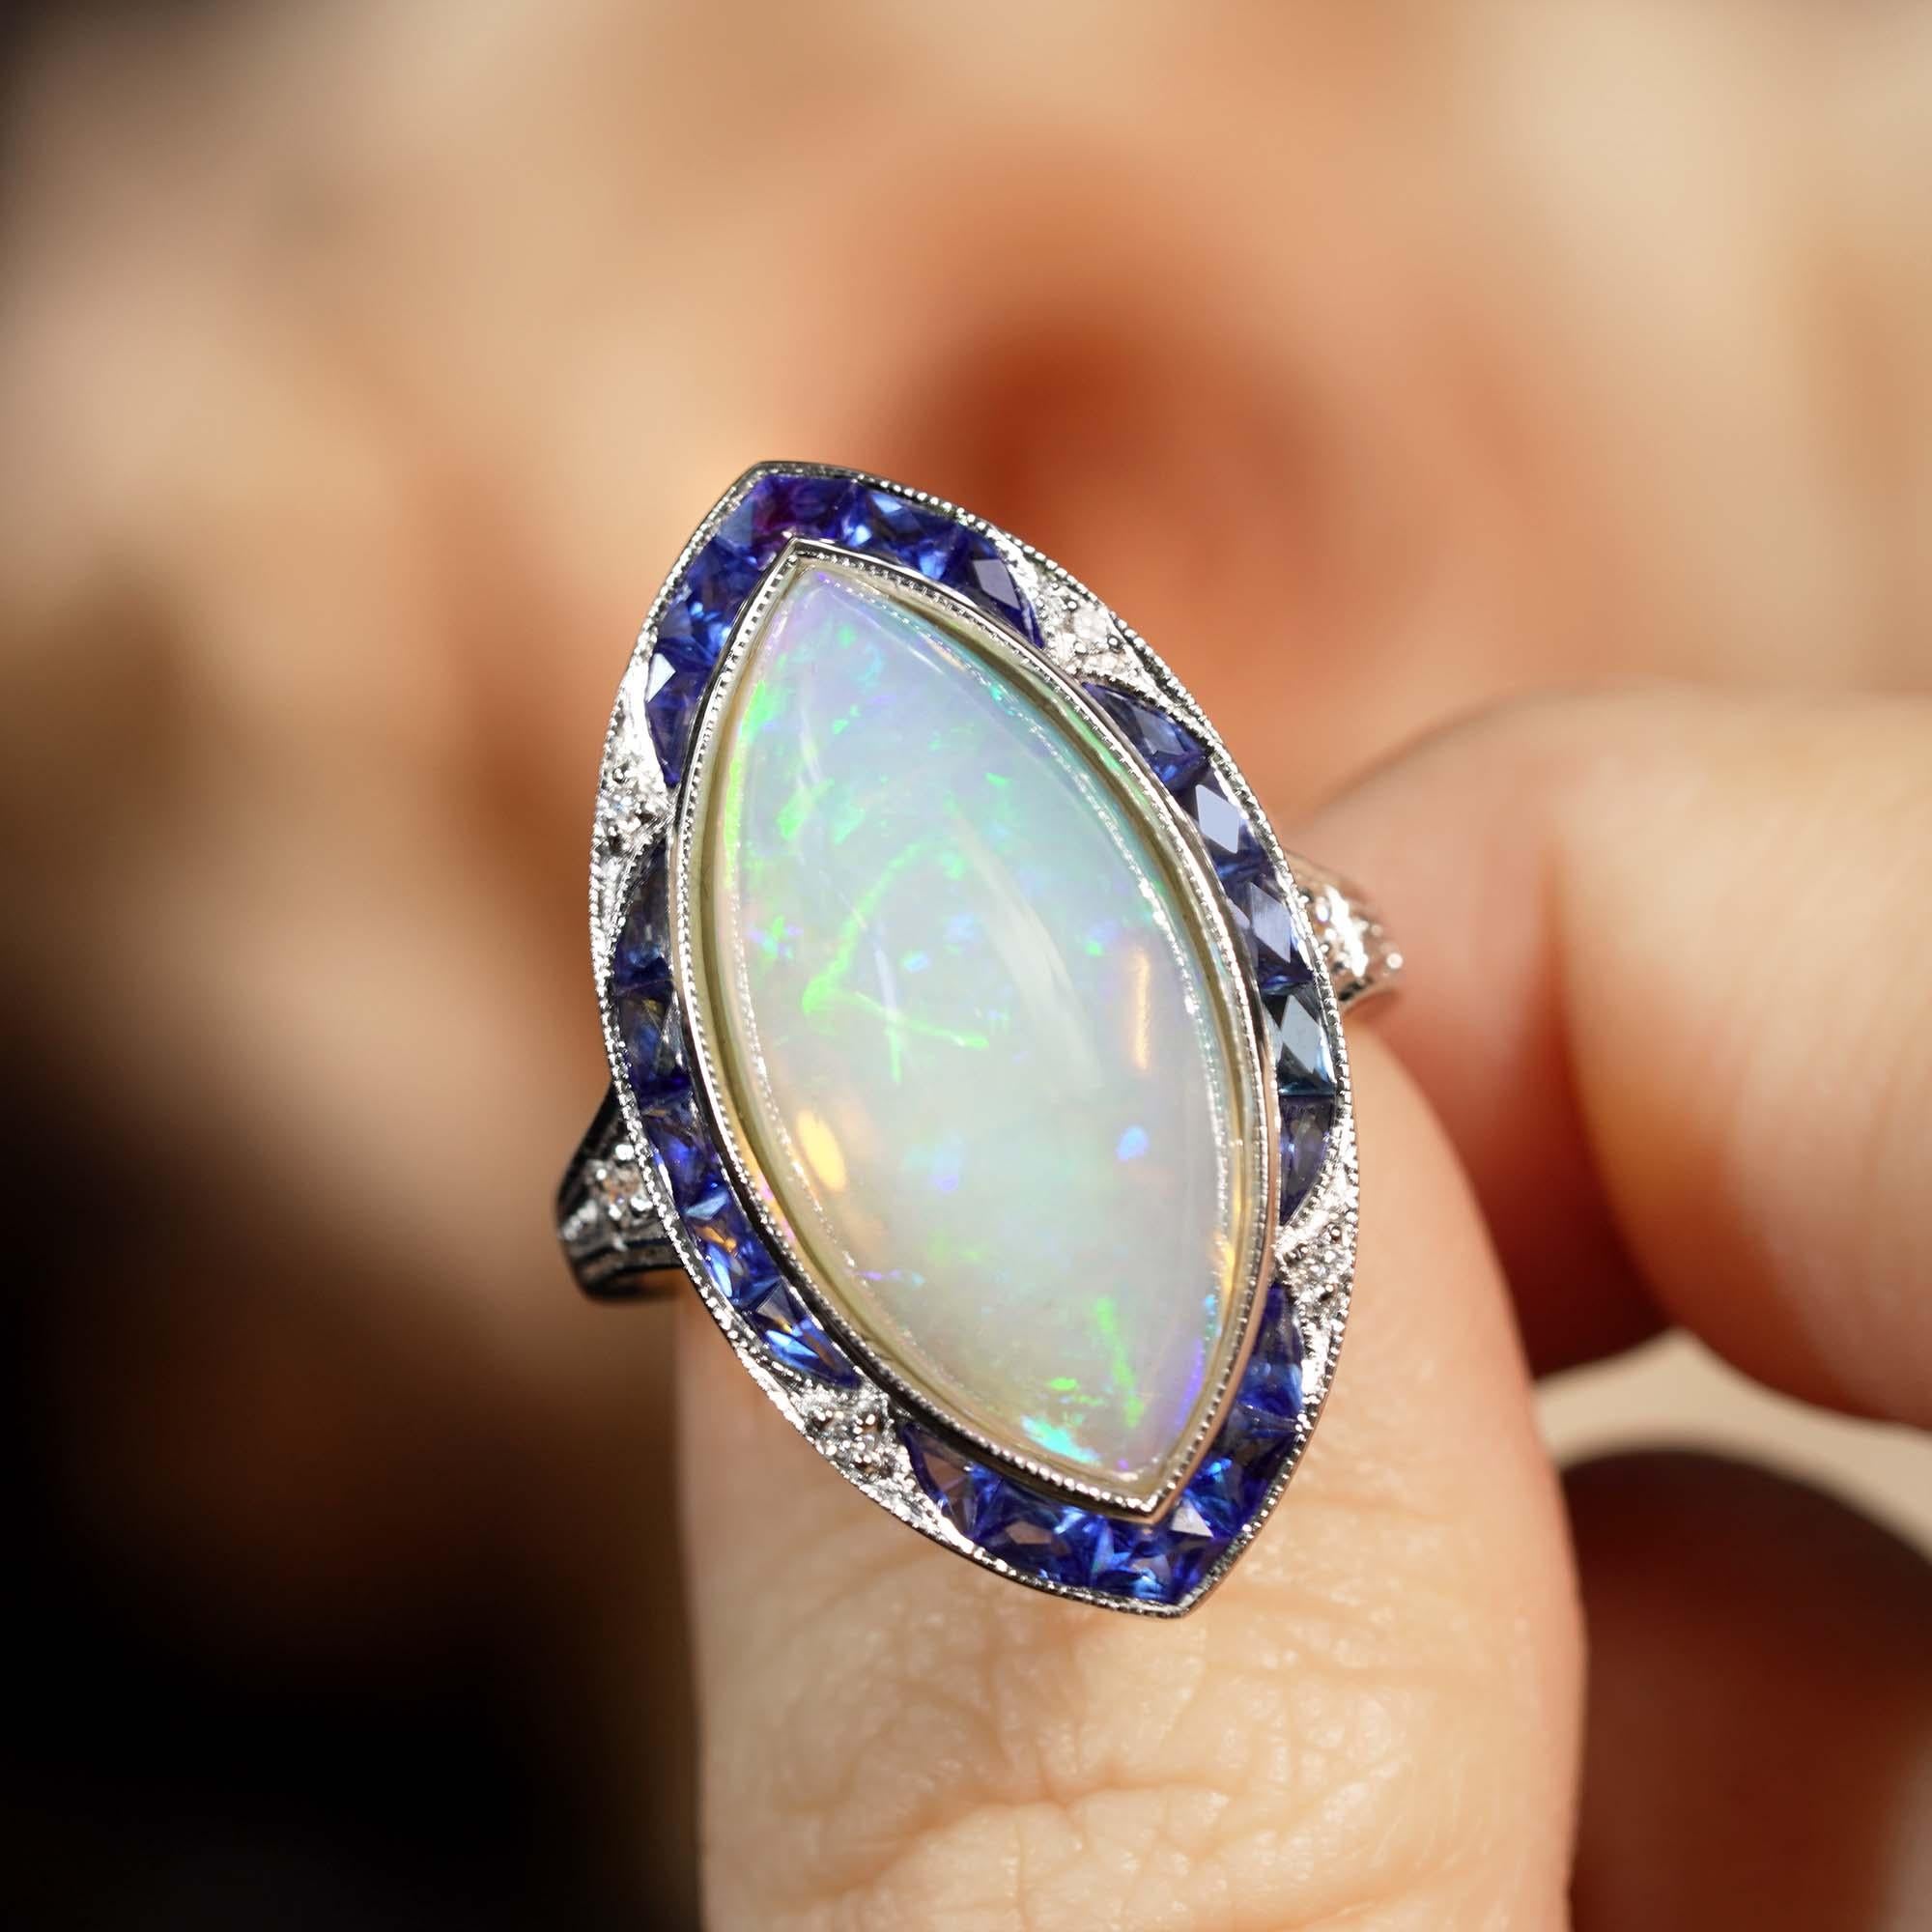 The soft milky white hue of marquise shaped cabochon opal that glows at the center of this alluring Art Deco inspired ring is punctuated throughout with iridescent flecks of green, orange, violet and blue and is set in a milgraning edged white gold